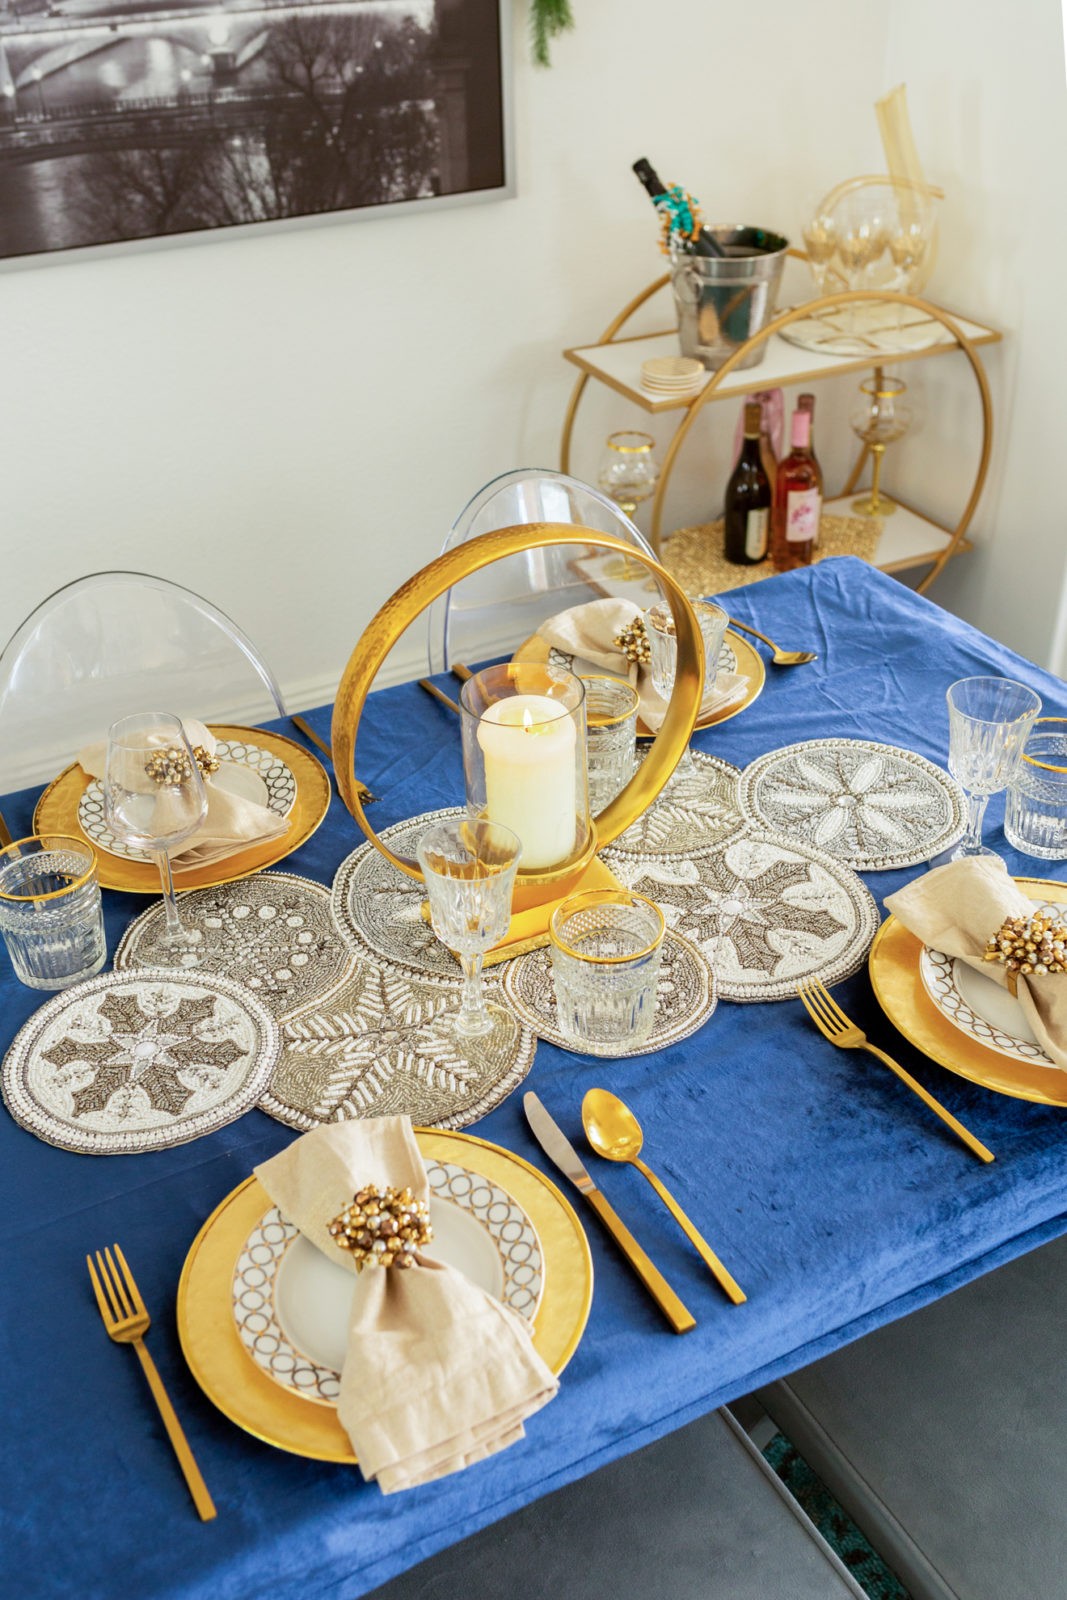 Holiday Home Decor 2019 by popular Los Angeles life and style blogger, Laura Lily: image of a dinning room table decorated with Z Gallierie plates, napkins, and napkin ring holders, Home Goods tablecloth, Amazon silverware, Home Goods beaded table runner, Z Gallerie bar cart, West Elm glasses